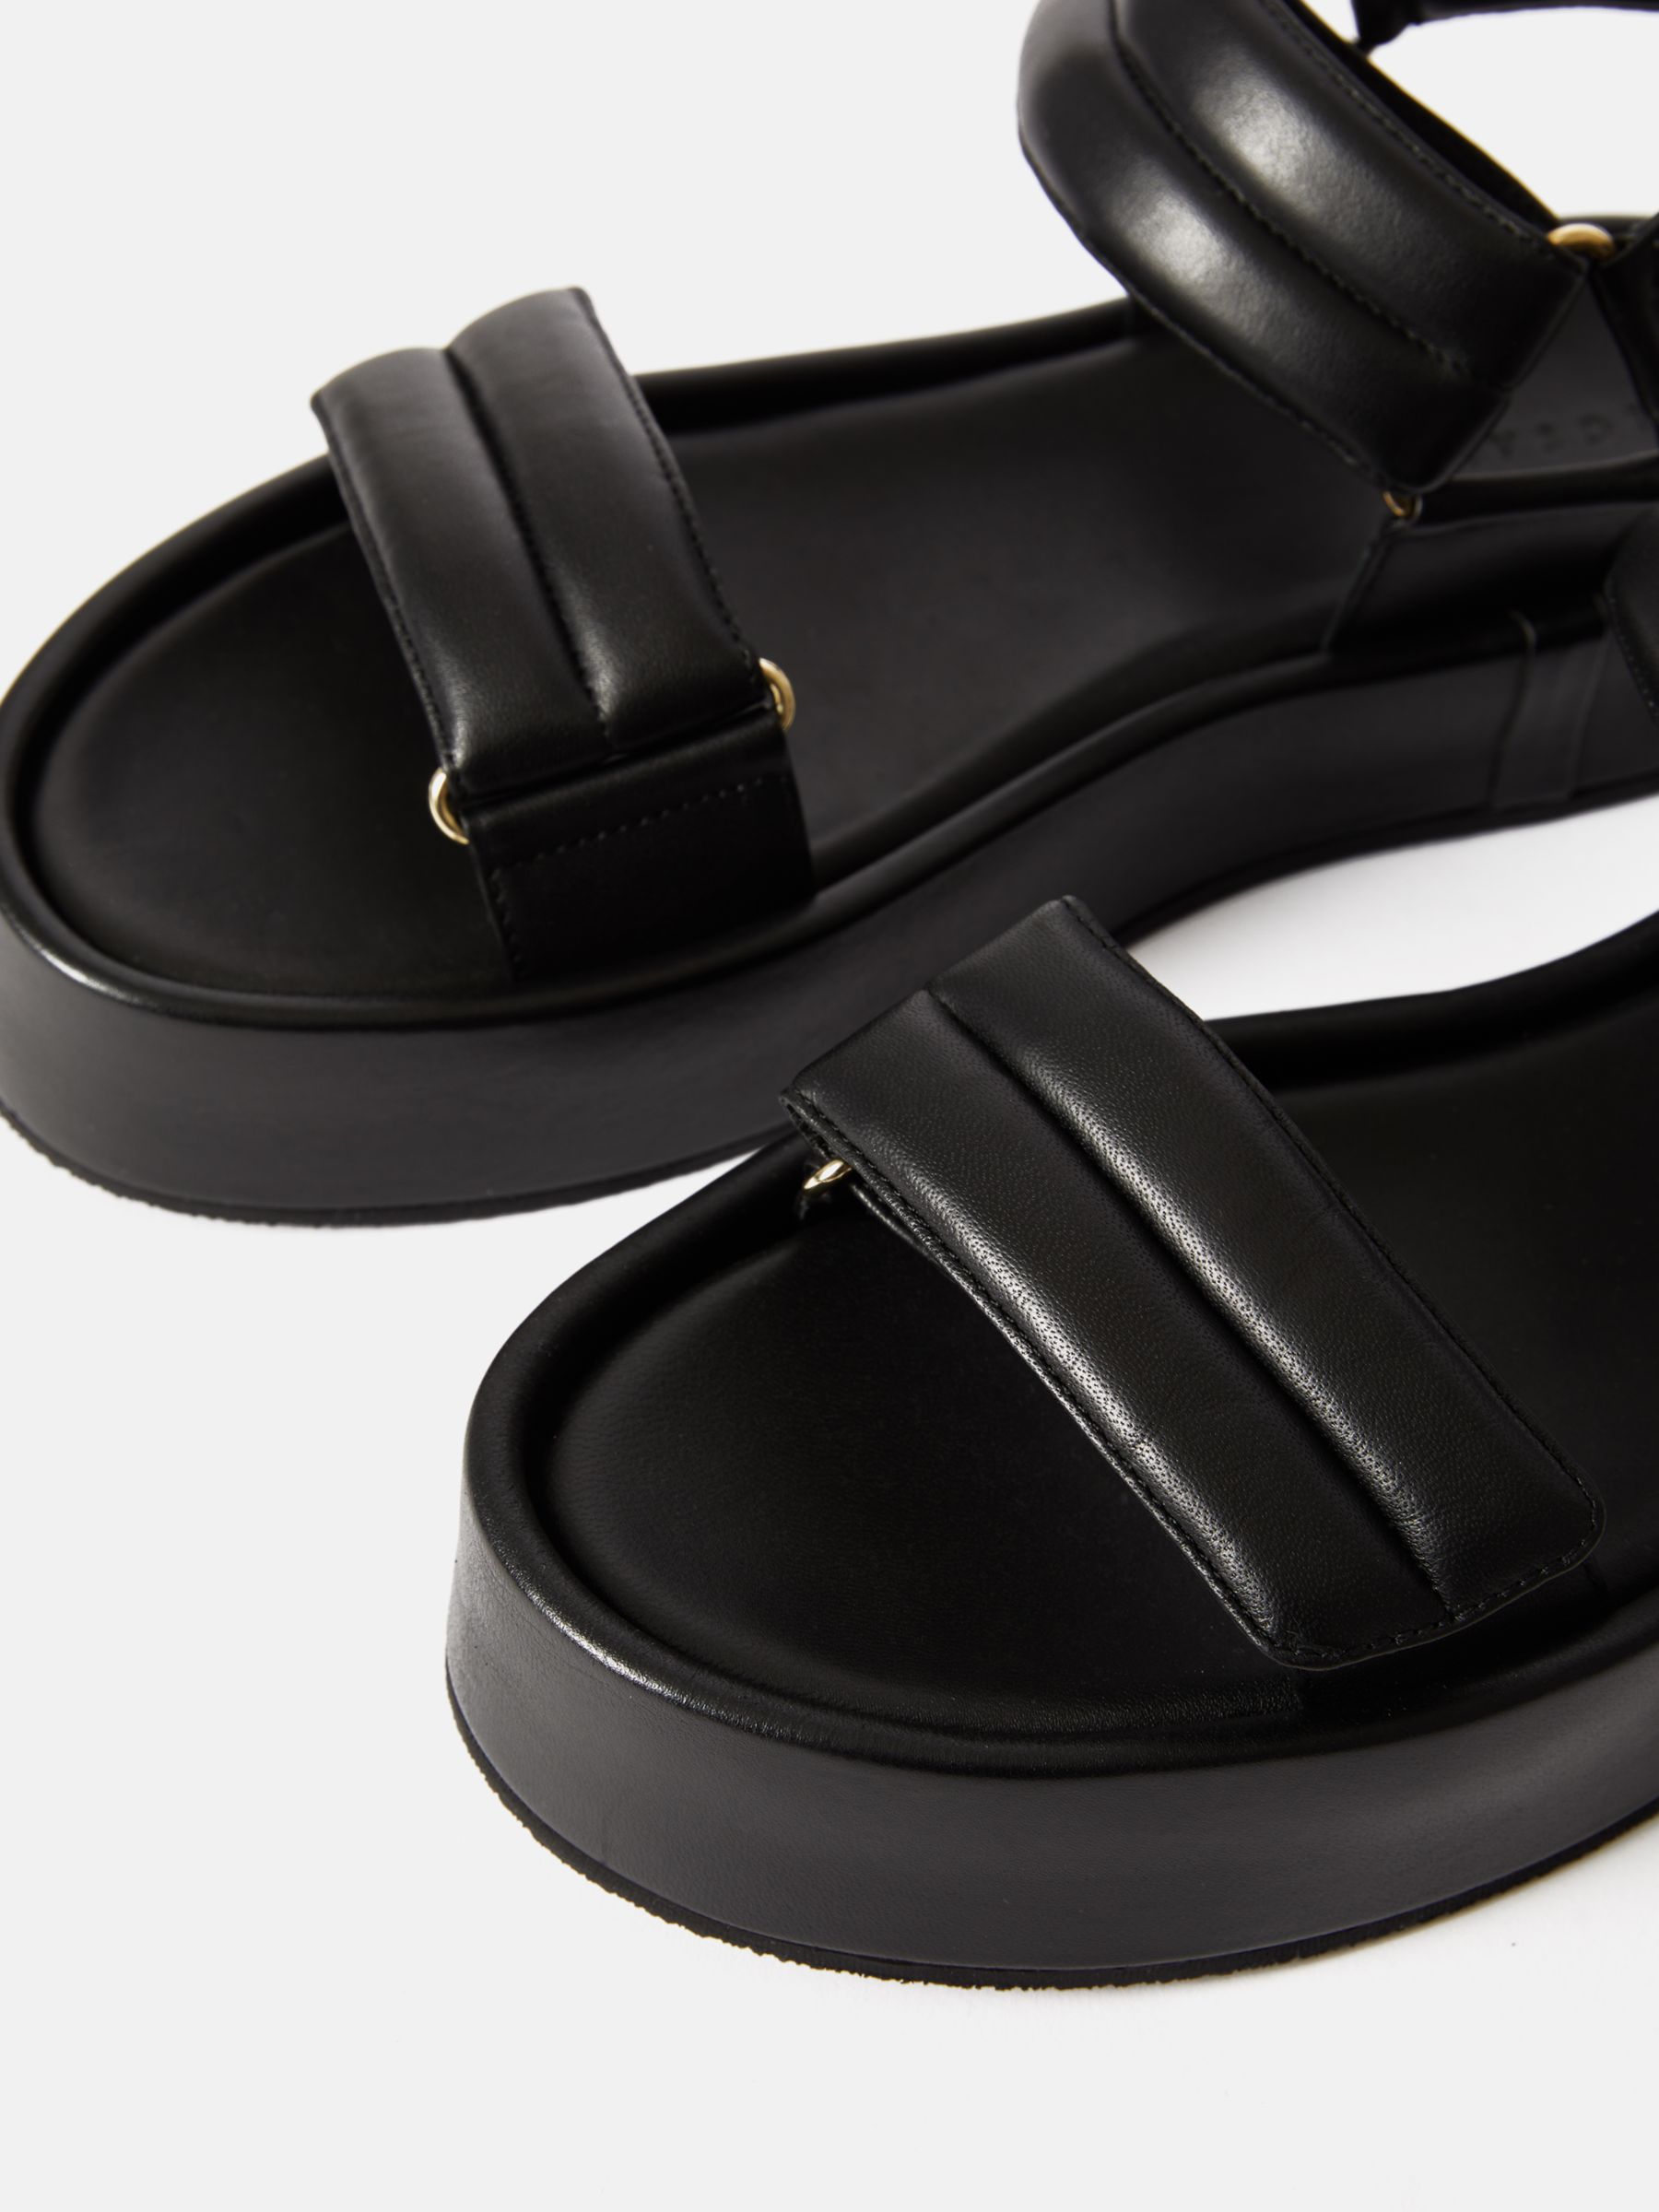 Jigsaw Raquel Leather Footbed Sandals, Black at John Lewis & Partners